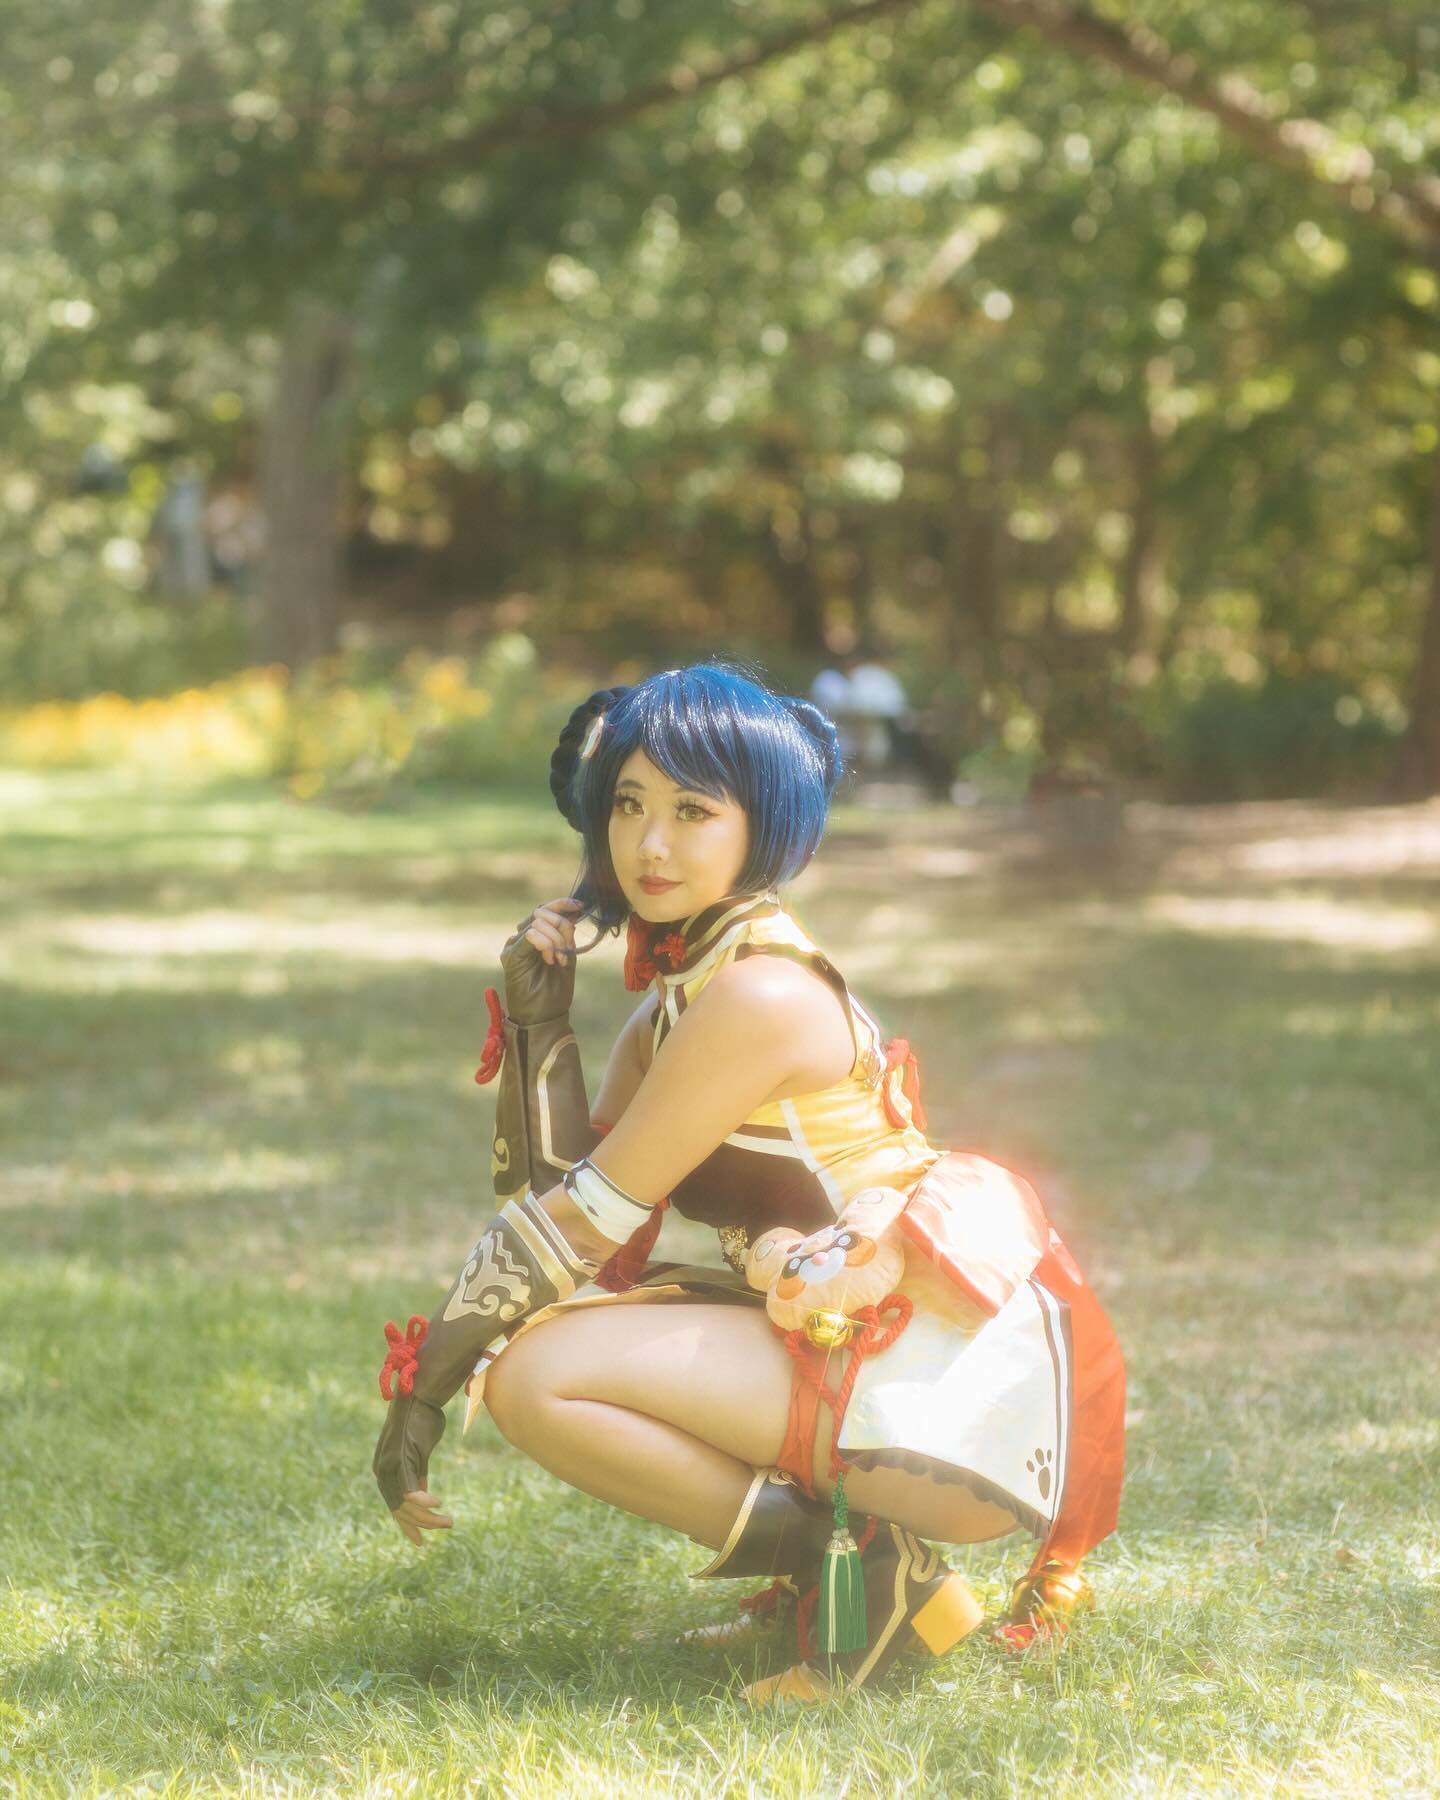 Swipe to see recent spring blooms 🌸🌸🌸 What’s your favorite part of spring?
📸: @butter_cos
__
#uwowocosplay #uwowo10years #cosplay #cosplaygirl #cosplayer #kawaii #genshinimpact #xiangling #genshinimpactcosplay #xianglingcosplay #hoyoverse #hoyoversegenshinimpact